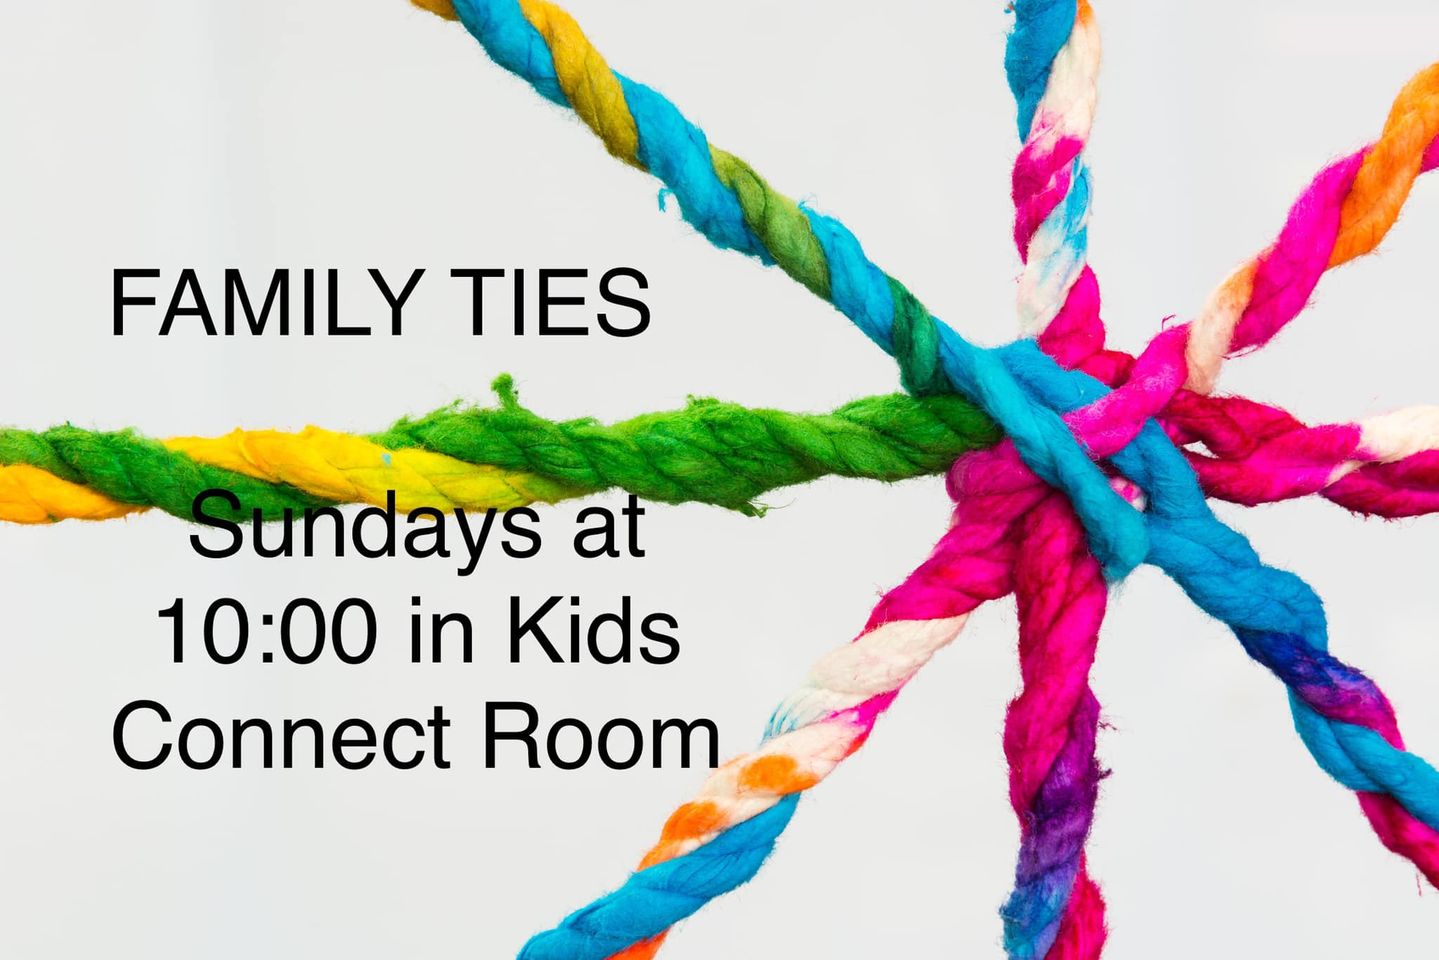 Family Ties: Sunday School Class for Kids and Their Families